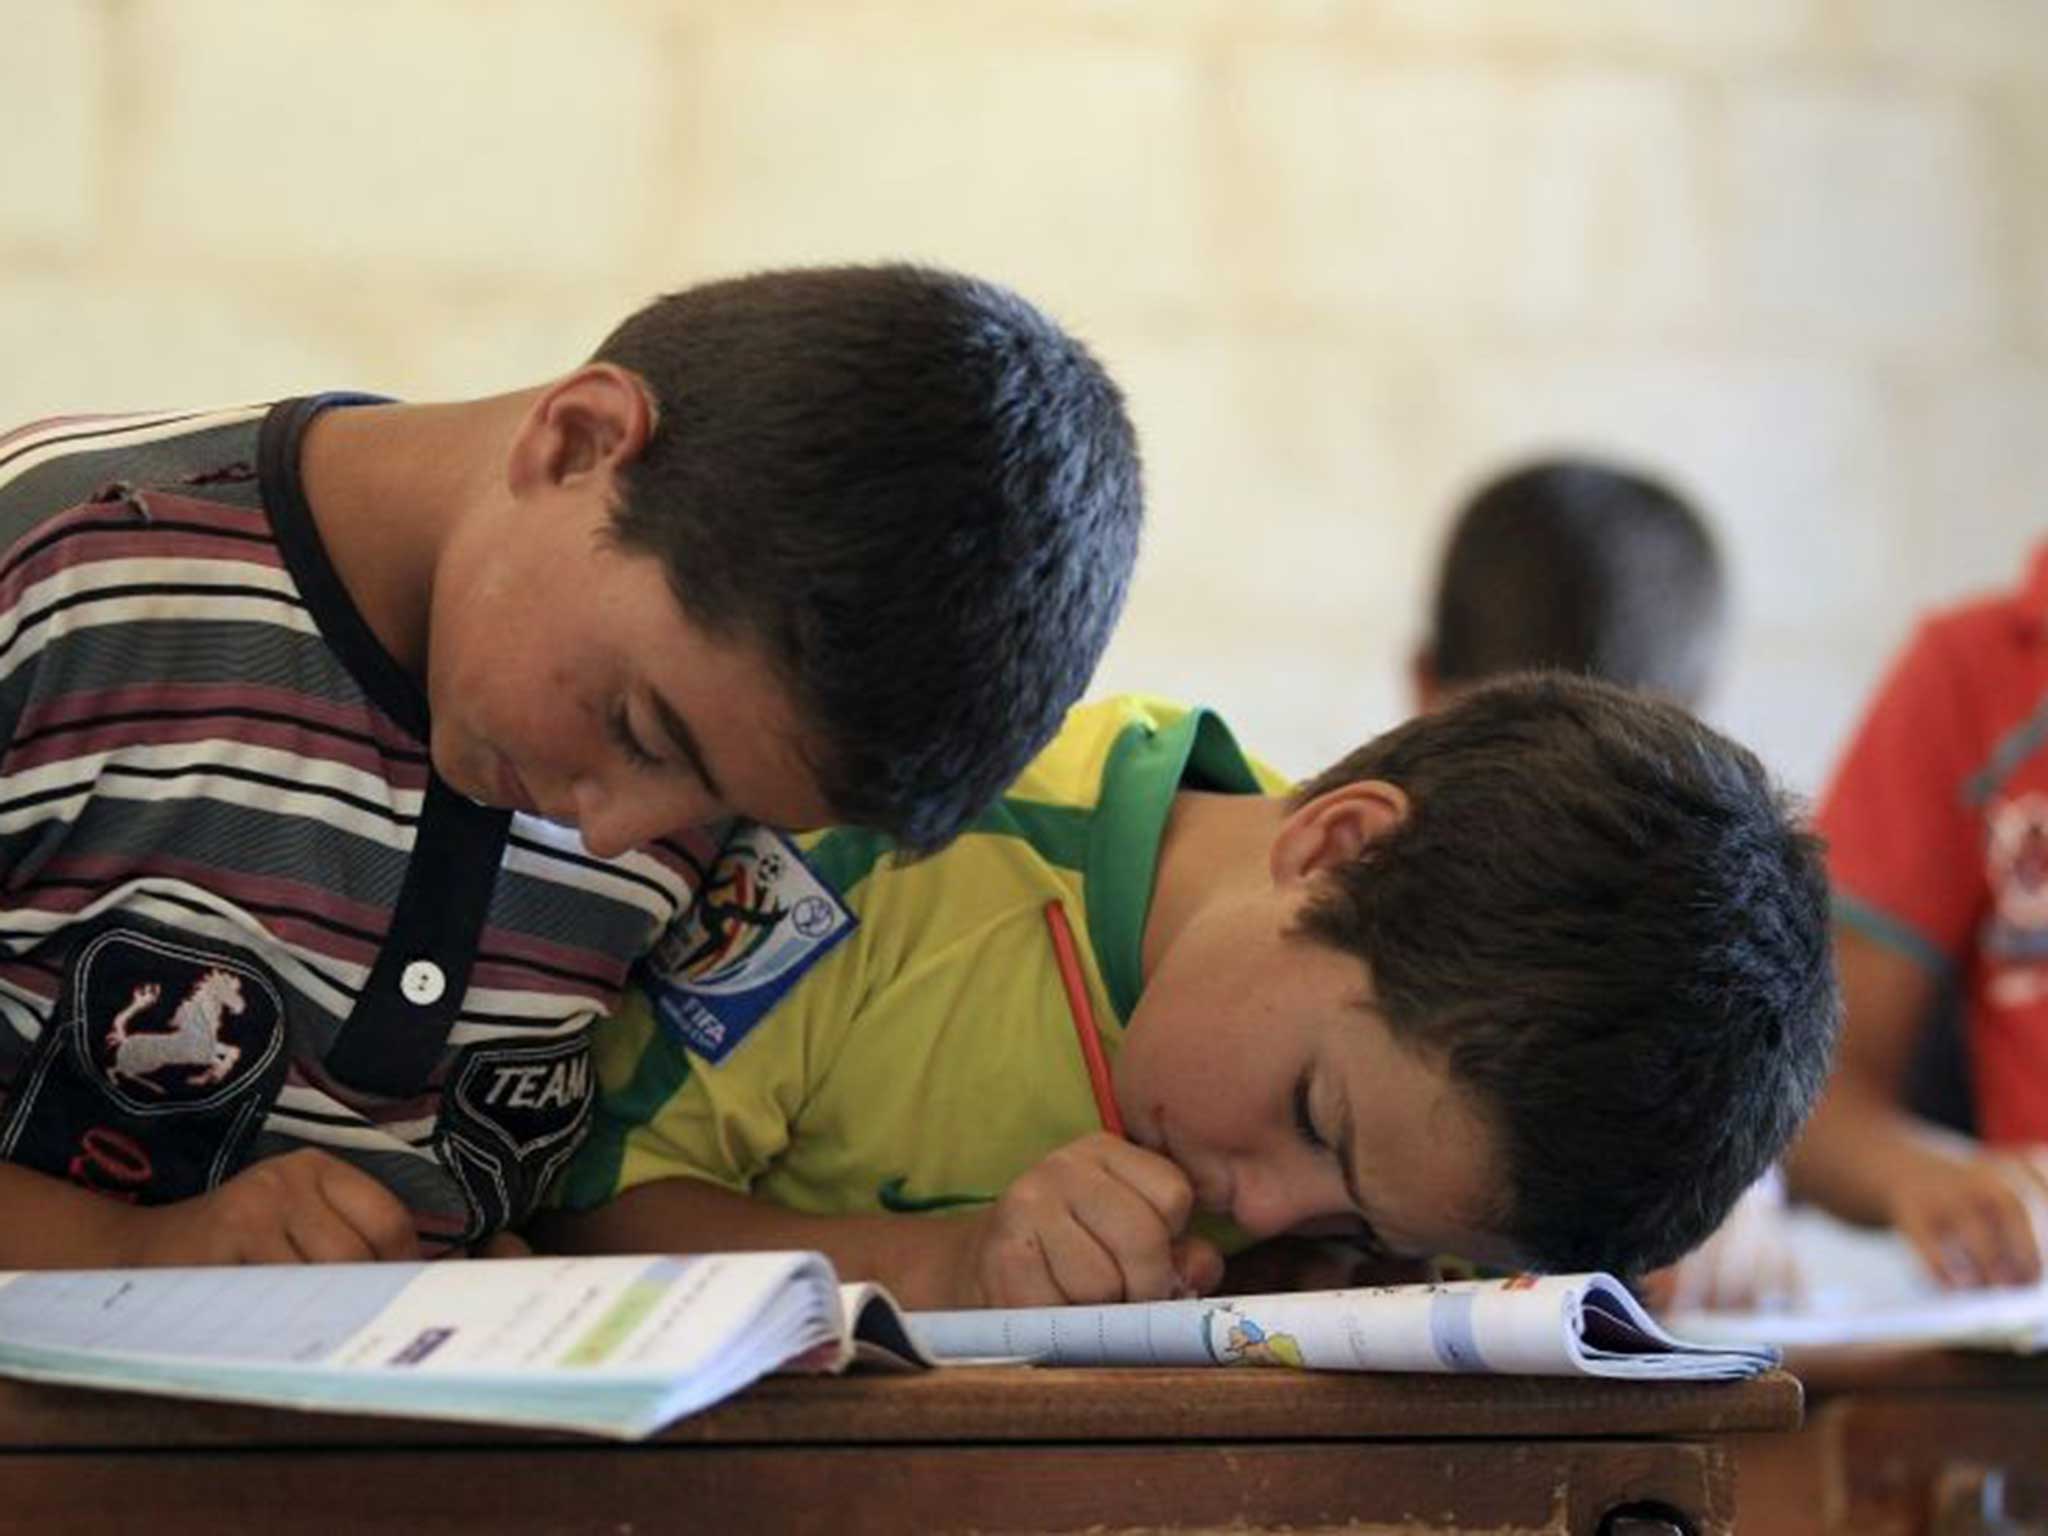 Children attend a class during the first day of school in Idlib countryside earlier this month